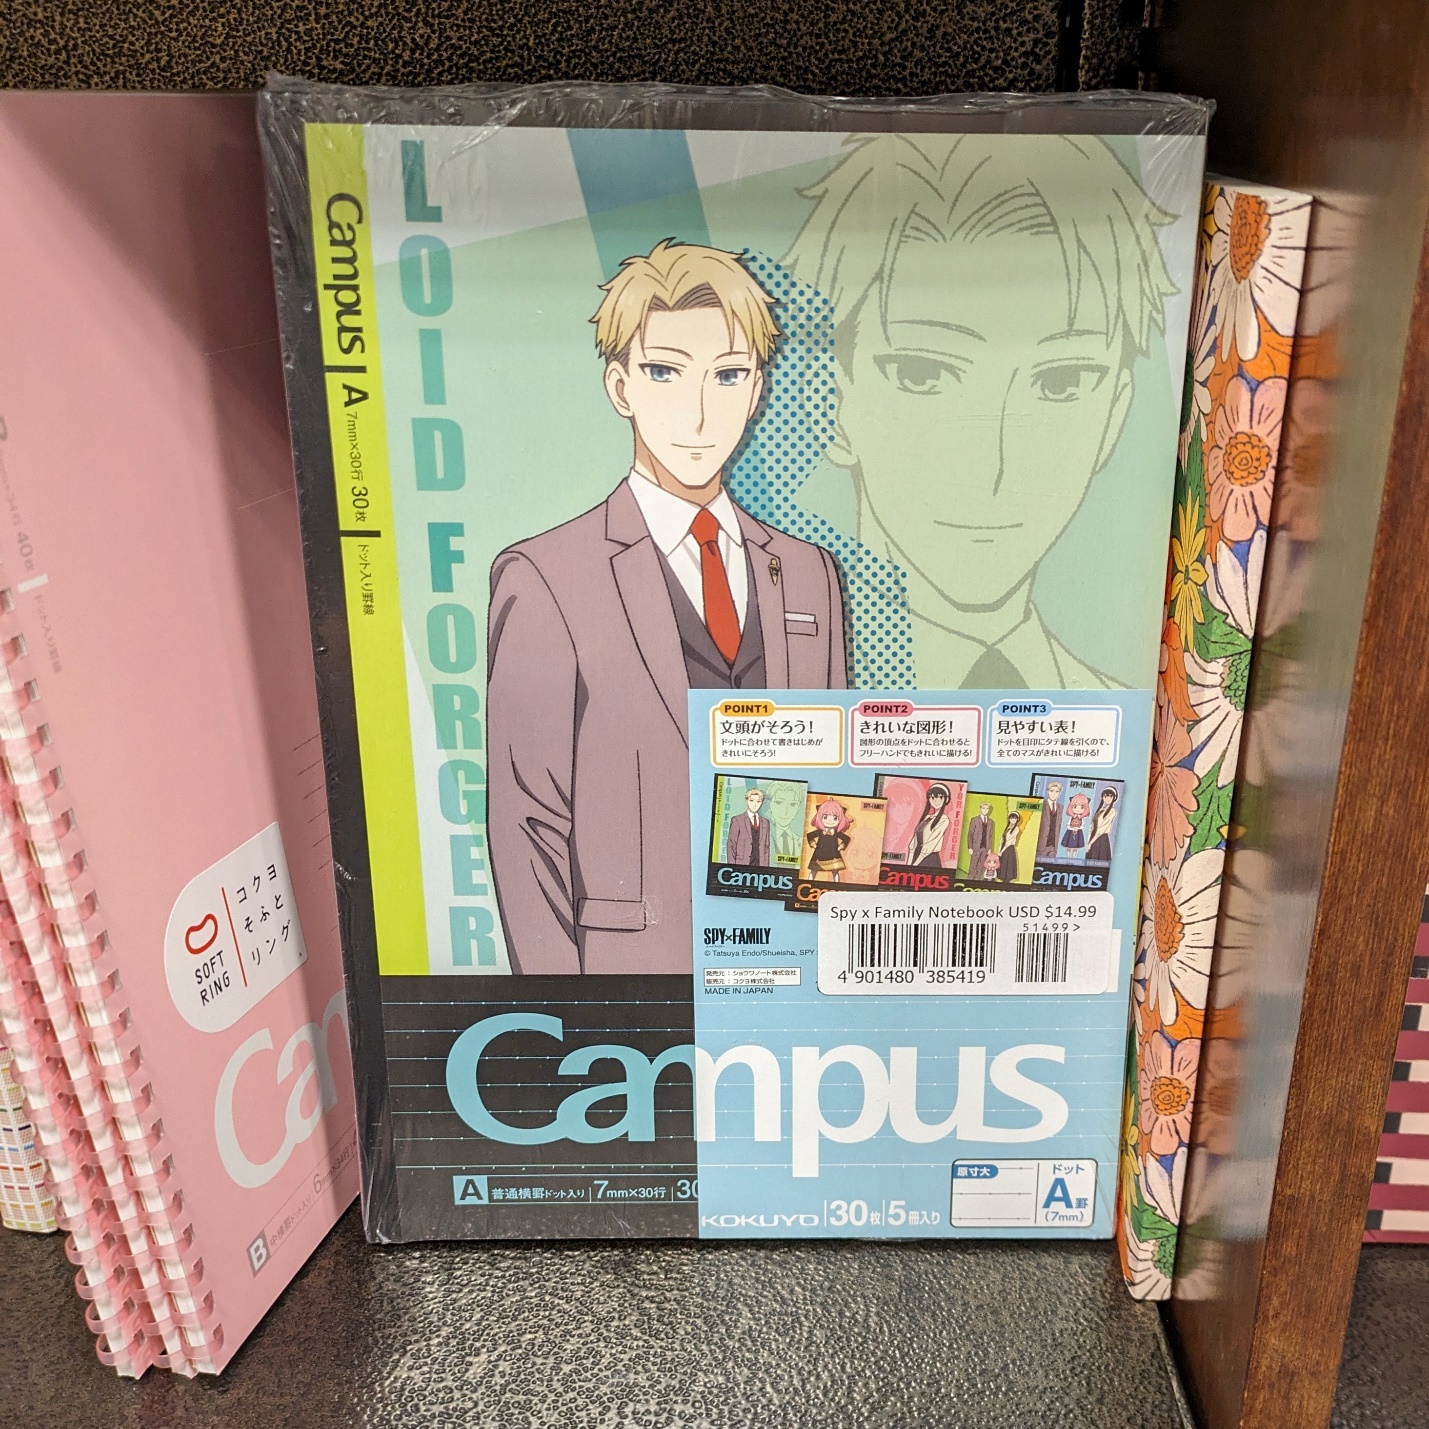 $15 for 5 Campus notebooks is strong value. The paper is very good quality. 